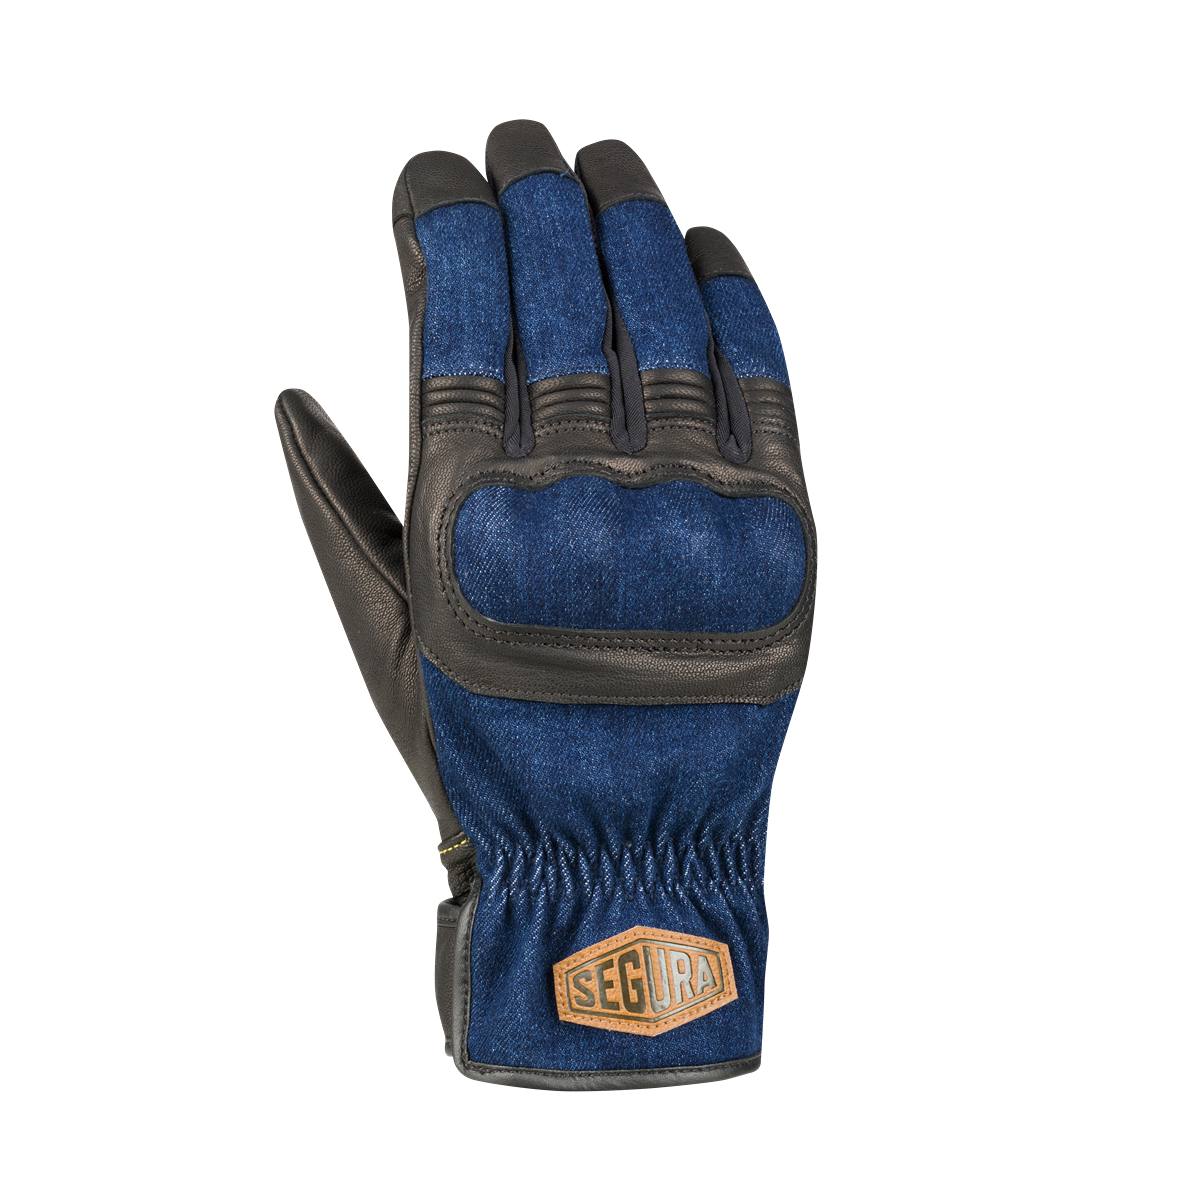 Image of Segura Hunky Gloves Black Blue Taille T10